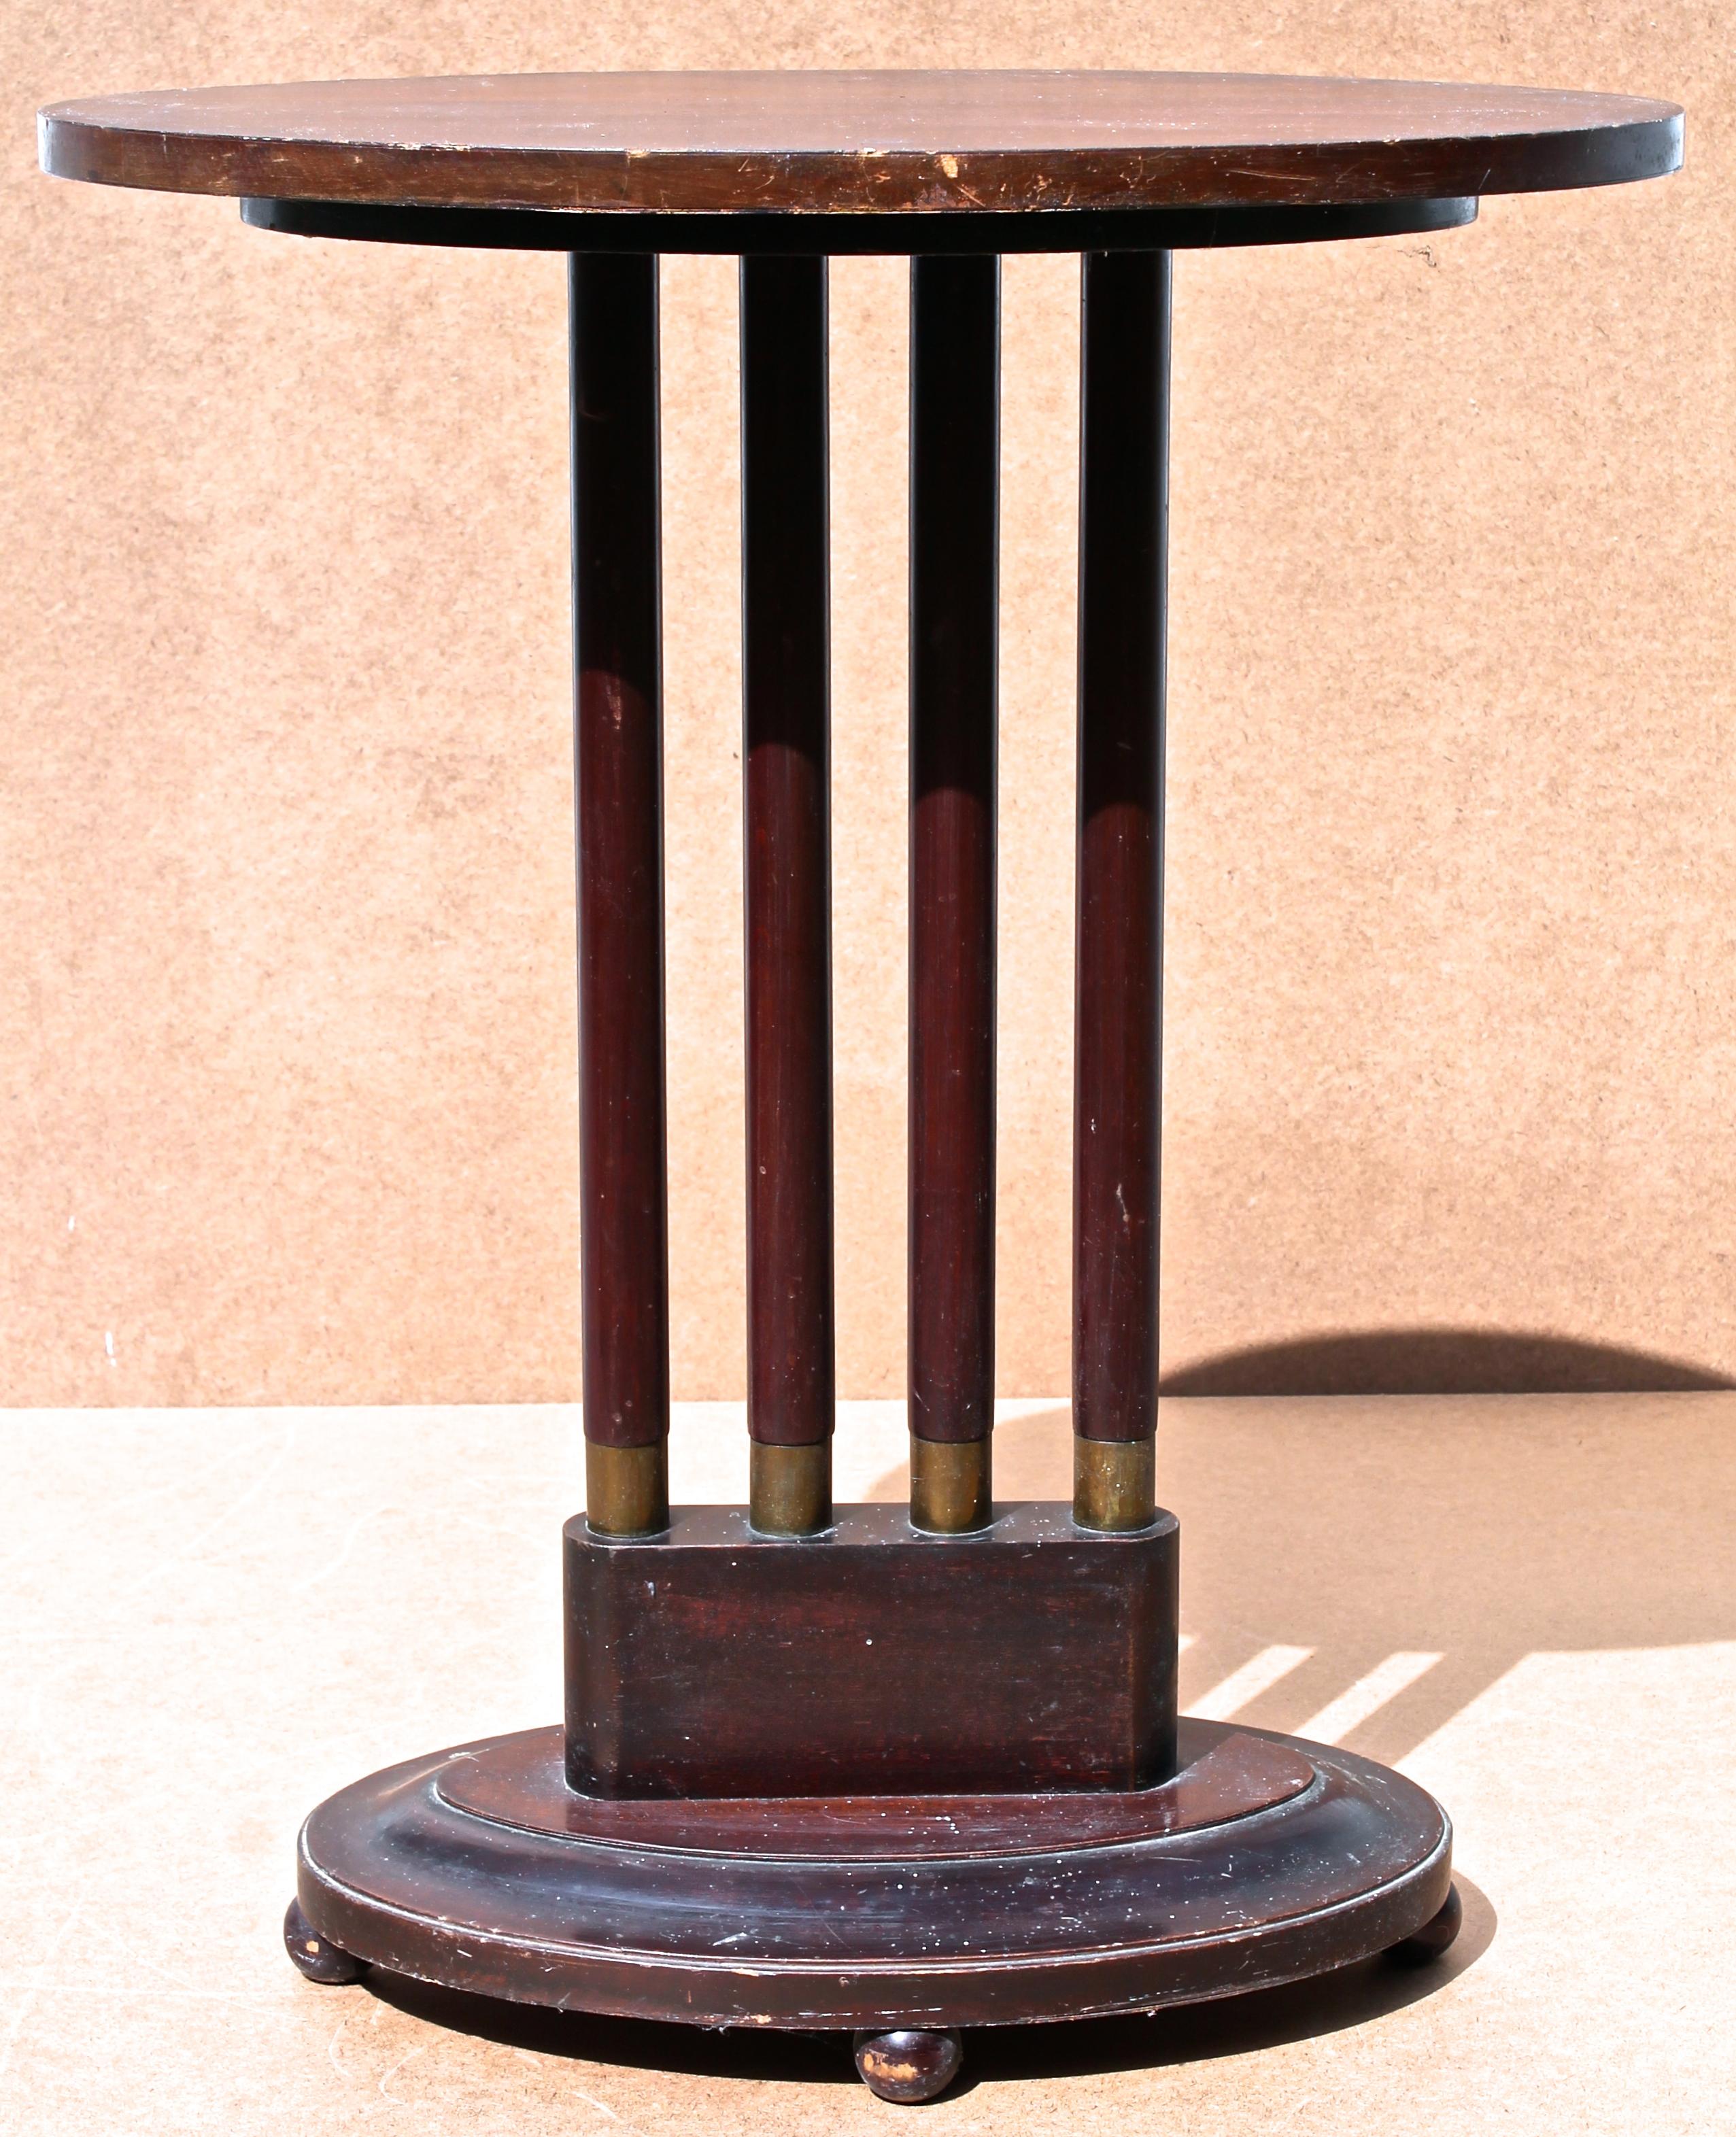 A small elongated oval table, supported by four cylindrical legs with brass end bottoms, that rise from an oval base sitting on four small balls. With an original dark brown surface. Unmarked.